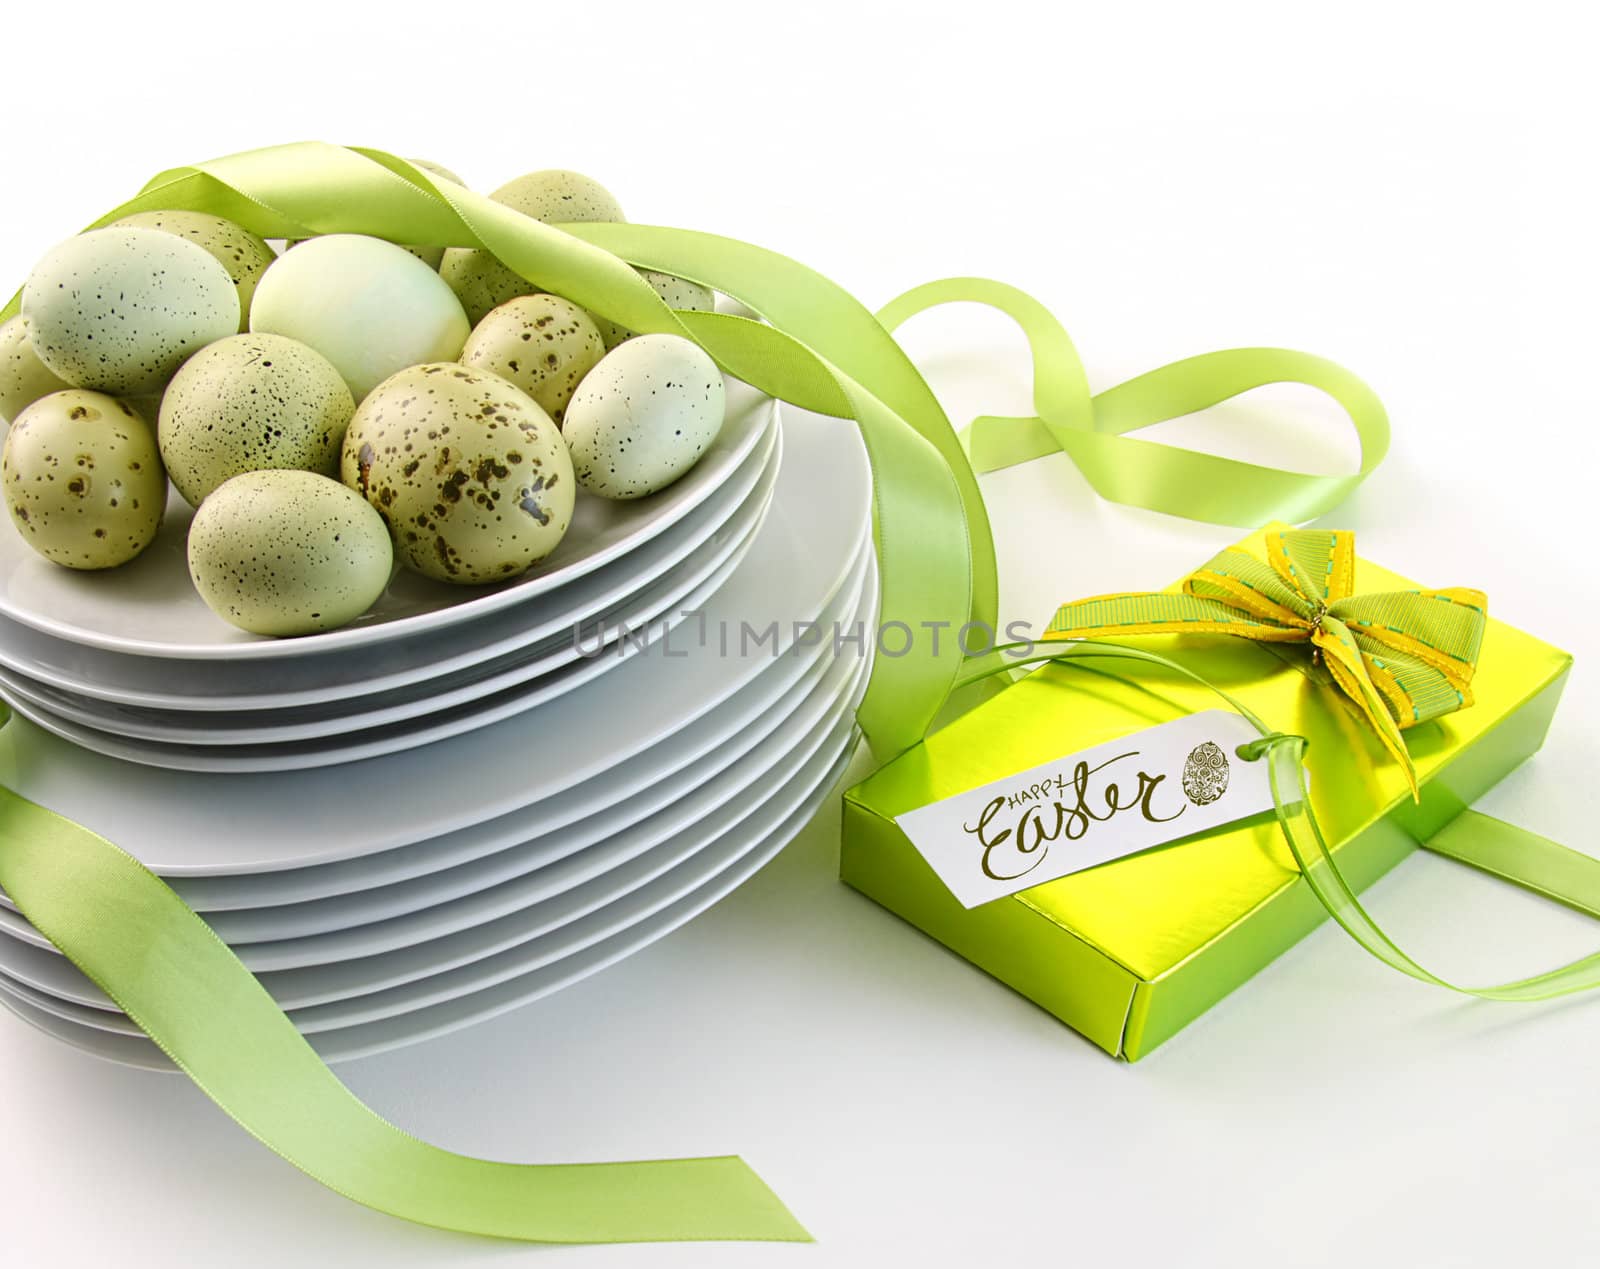 Speckled Easter eggs on plates with ribbons and gift